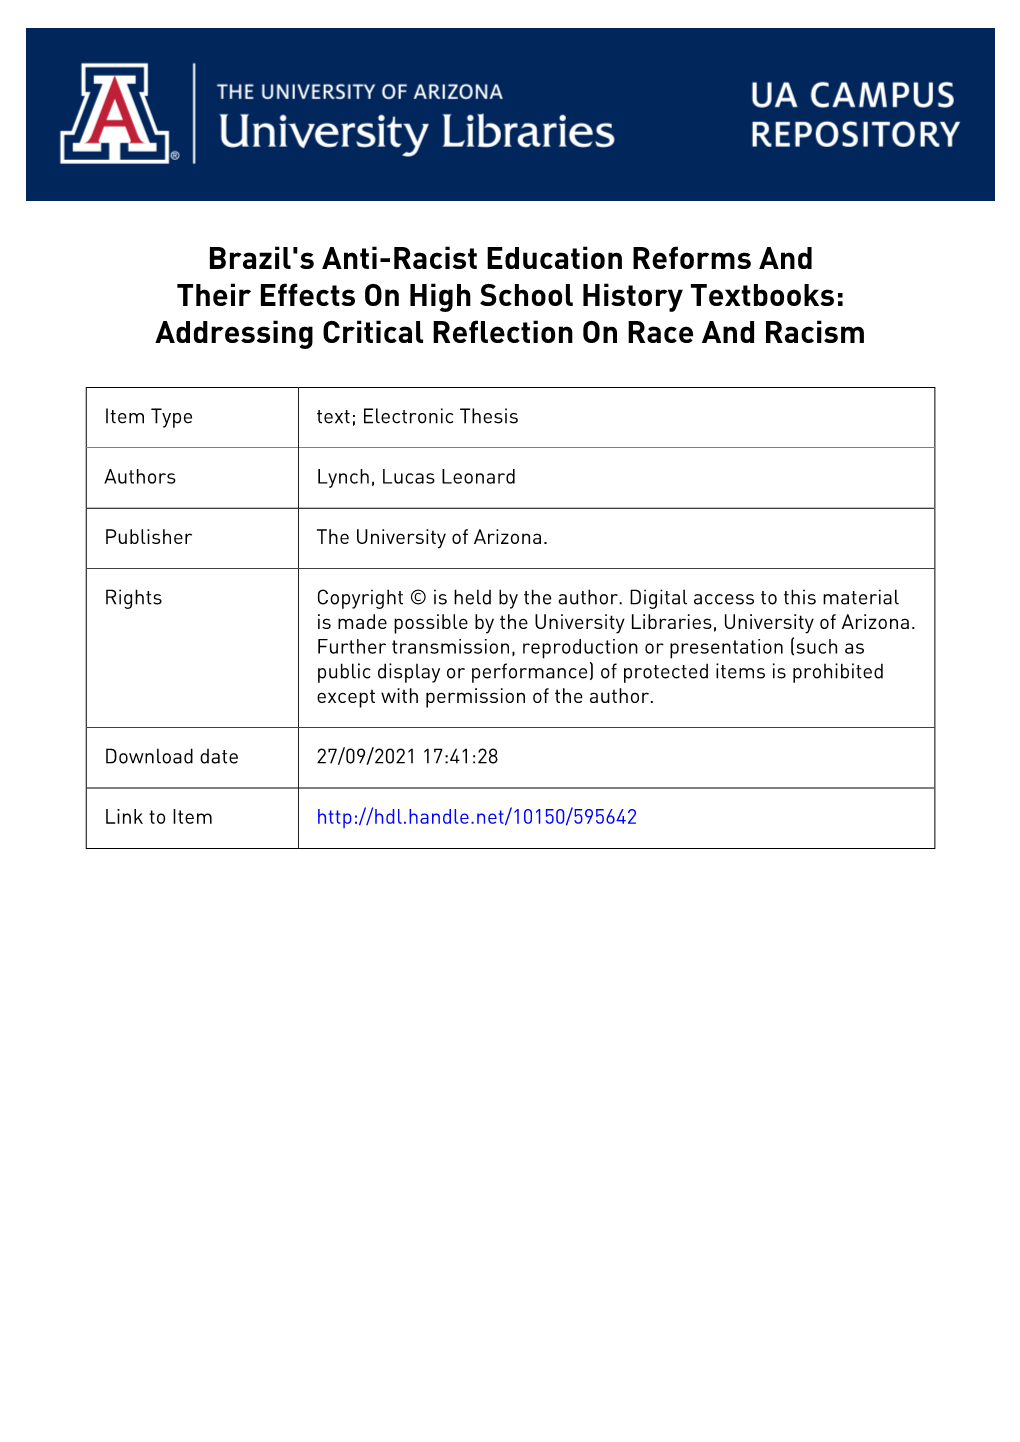 Brazil's Anti-Racist Education Reforms and Their Effects on High School History Textbooks: Addressing Critical Reflection on Race and Racism